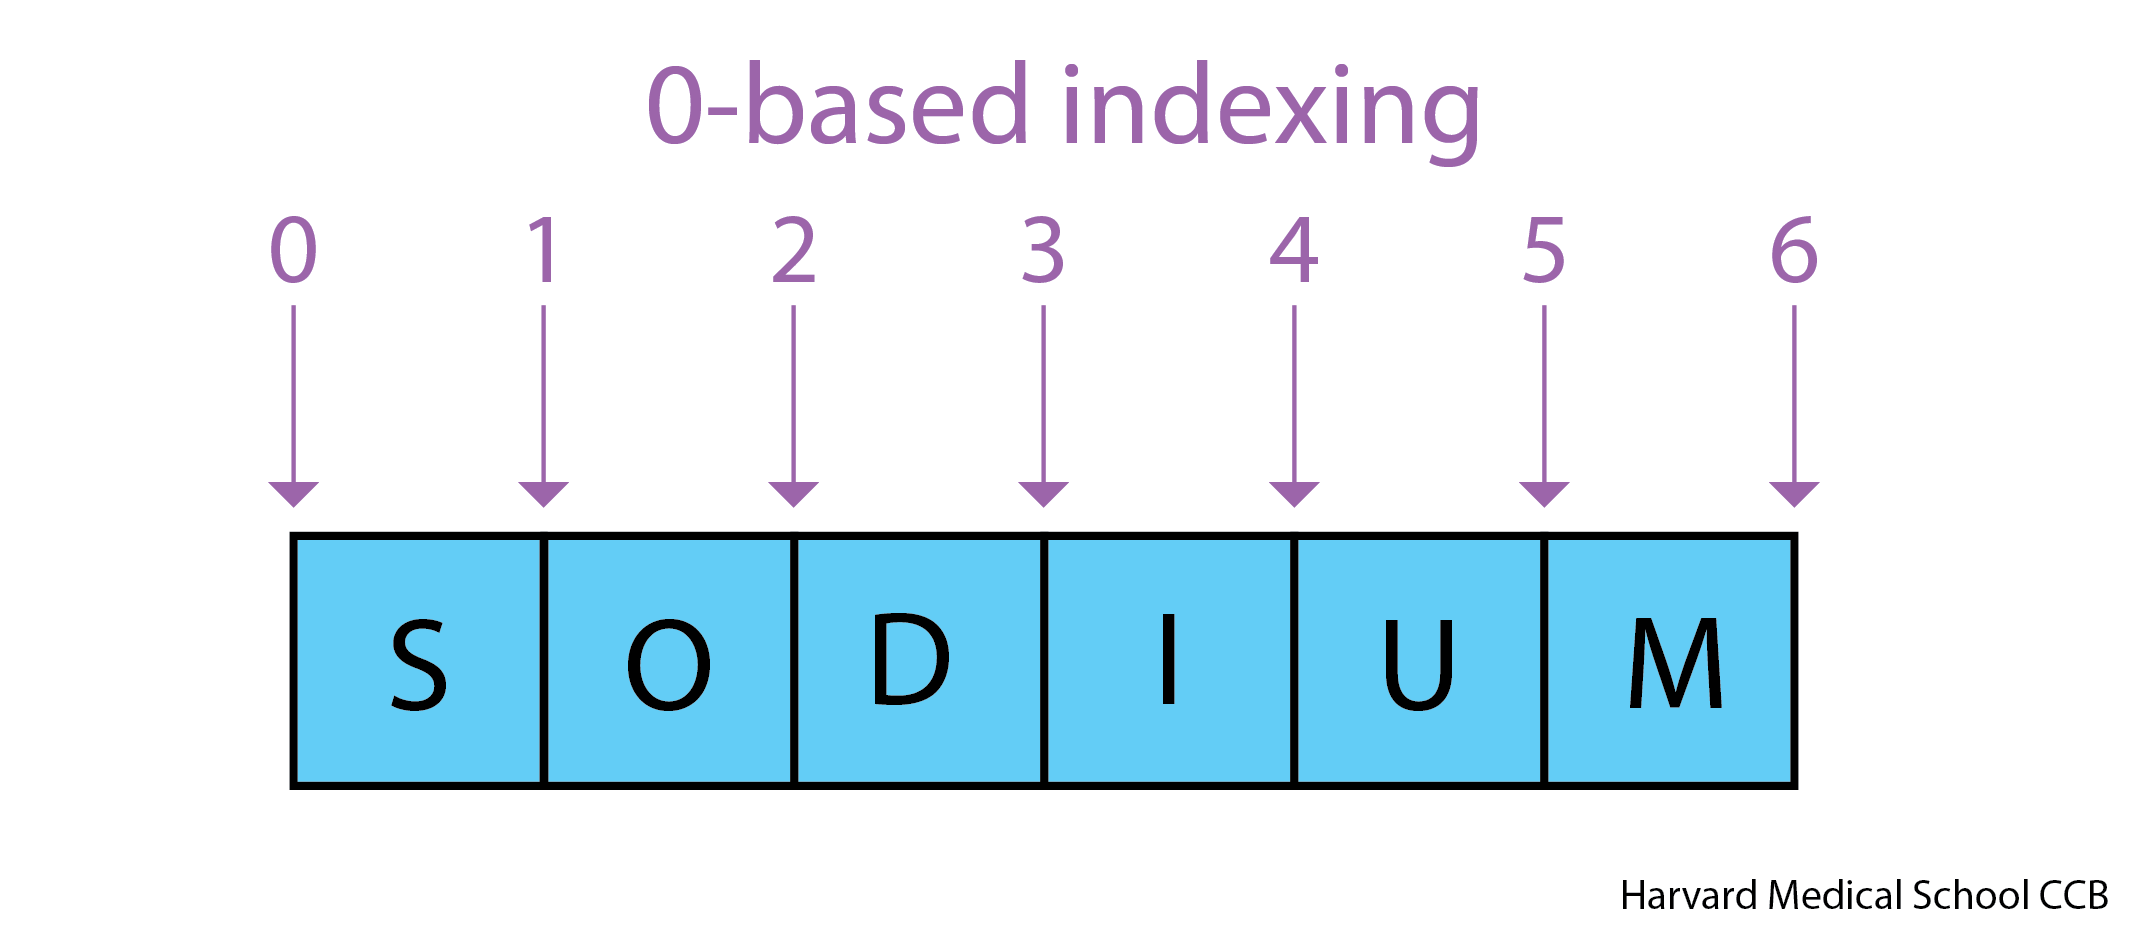 Python uses 0-based indexing.